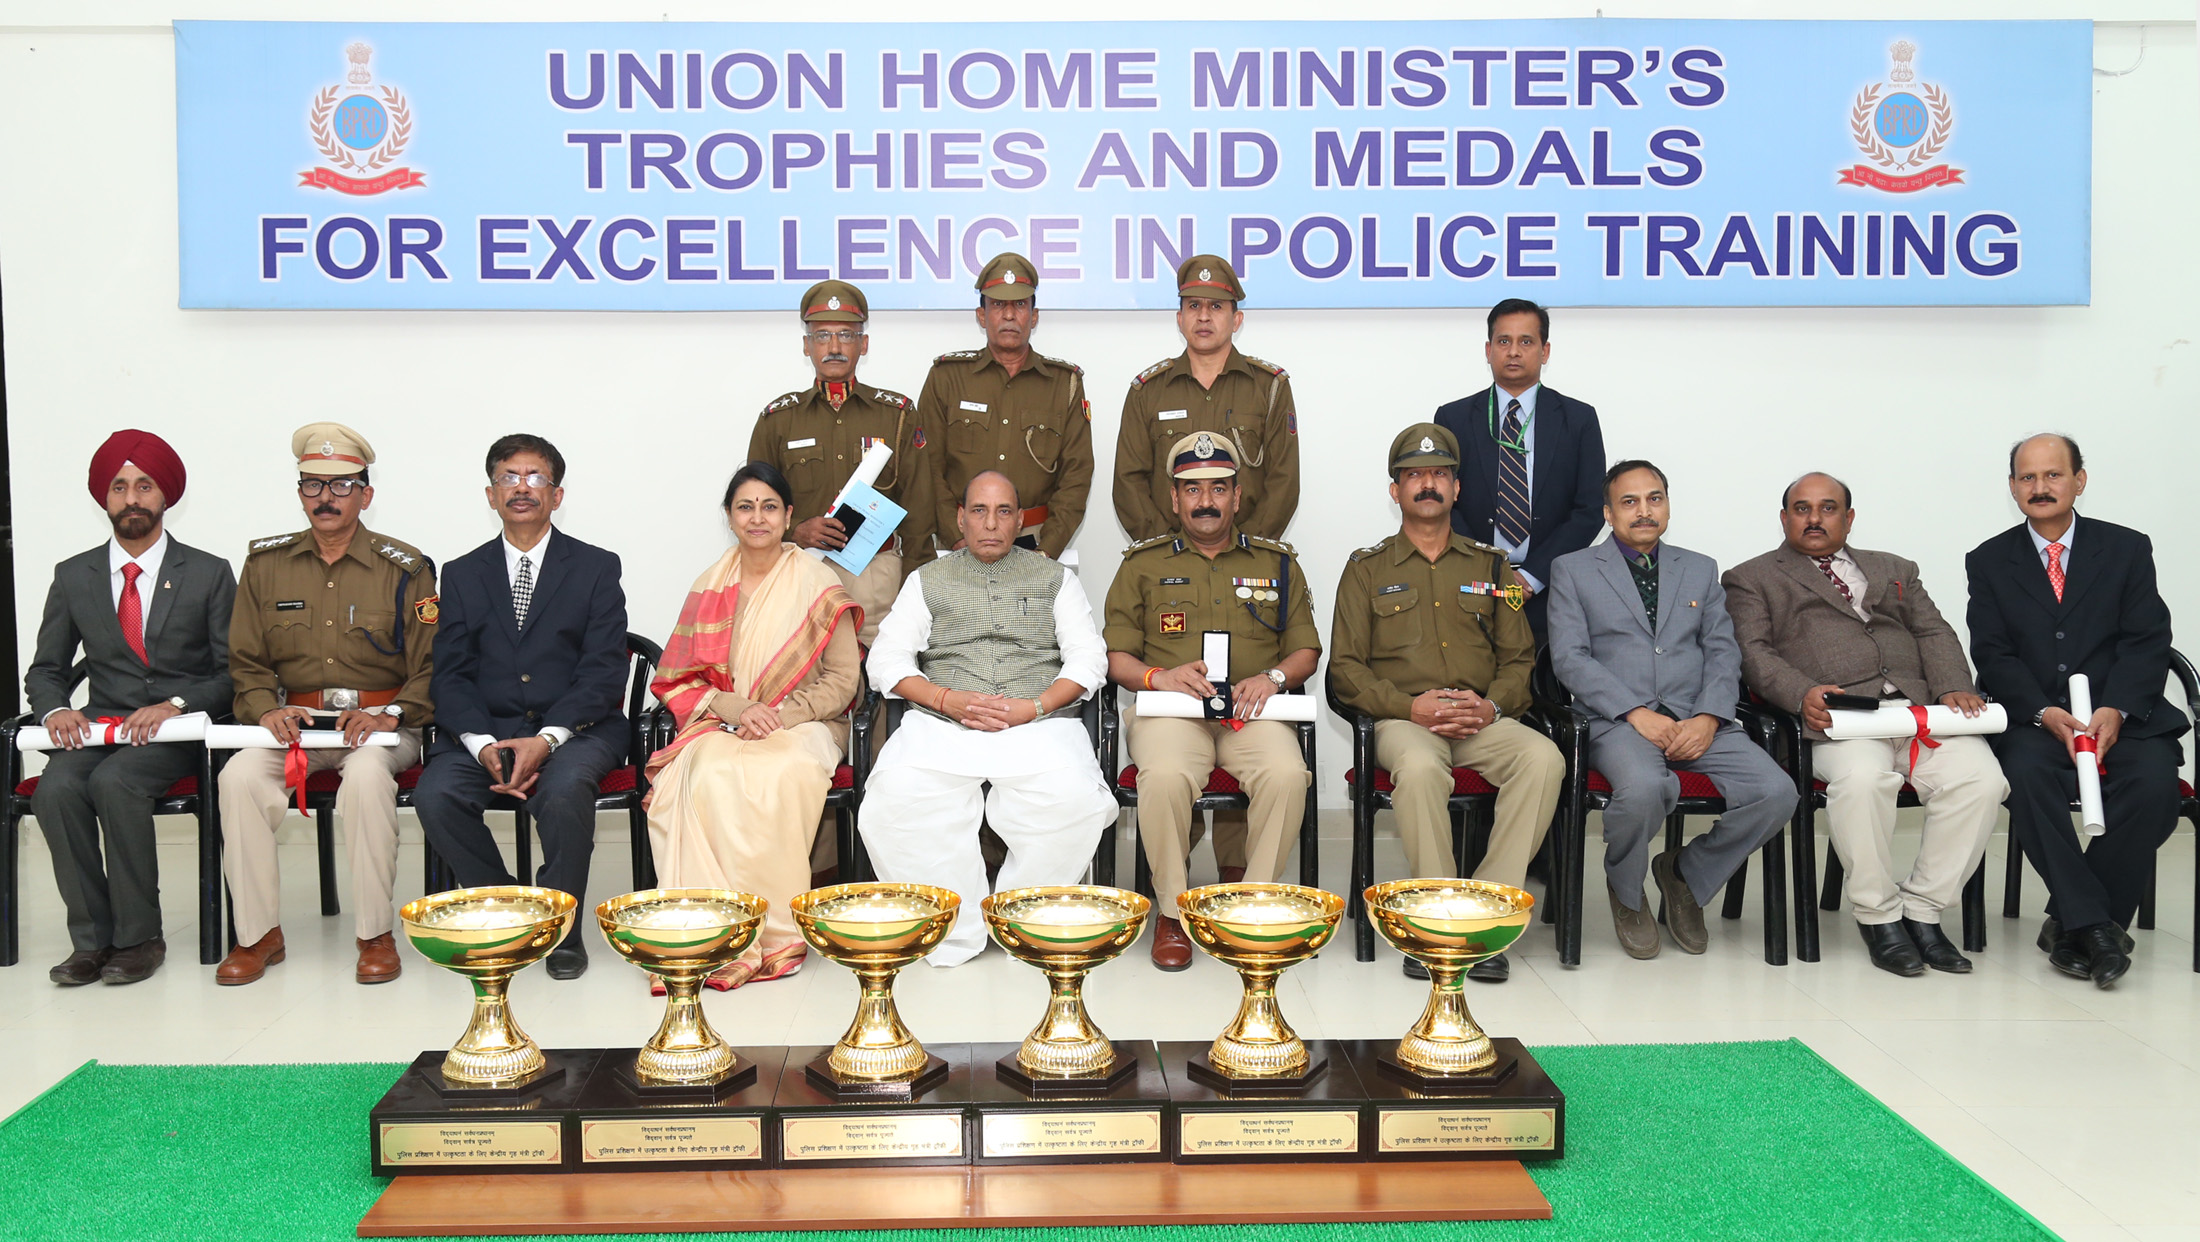 The Union Home Minister, Shri Rajnath Singh with the awardees at the Central Detective Training School (CDTS) campus, in Ghaziabad on December 16, 2016.